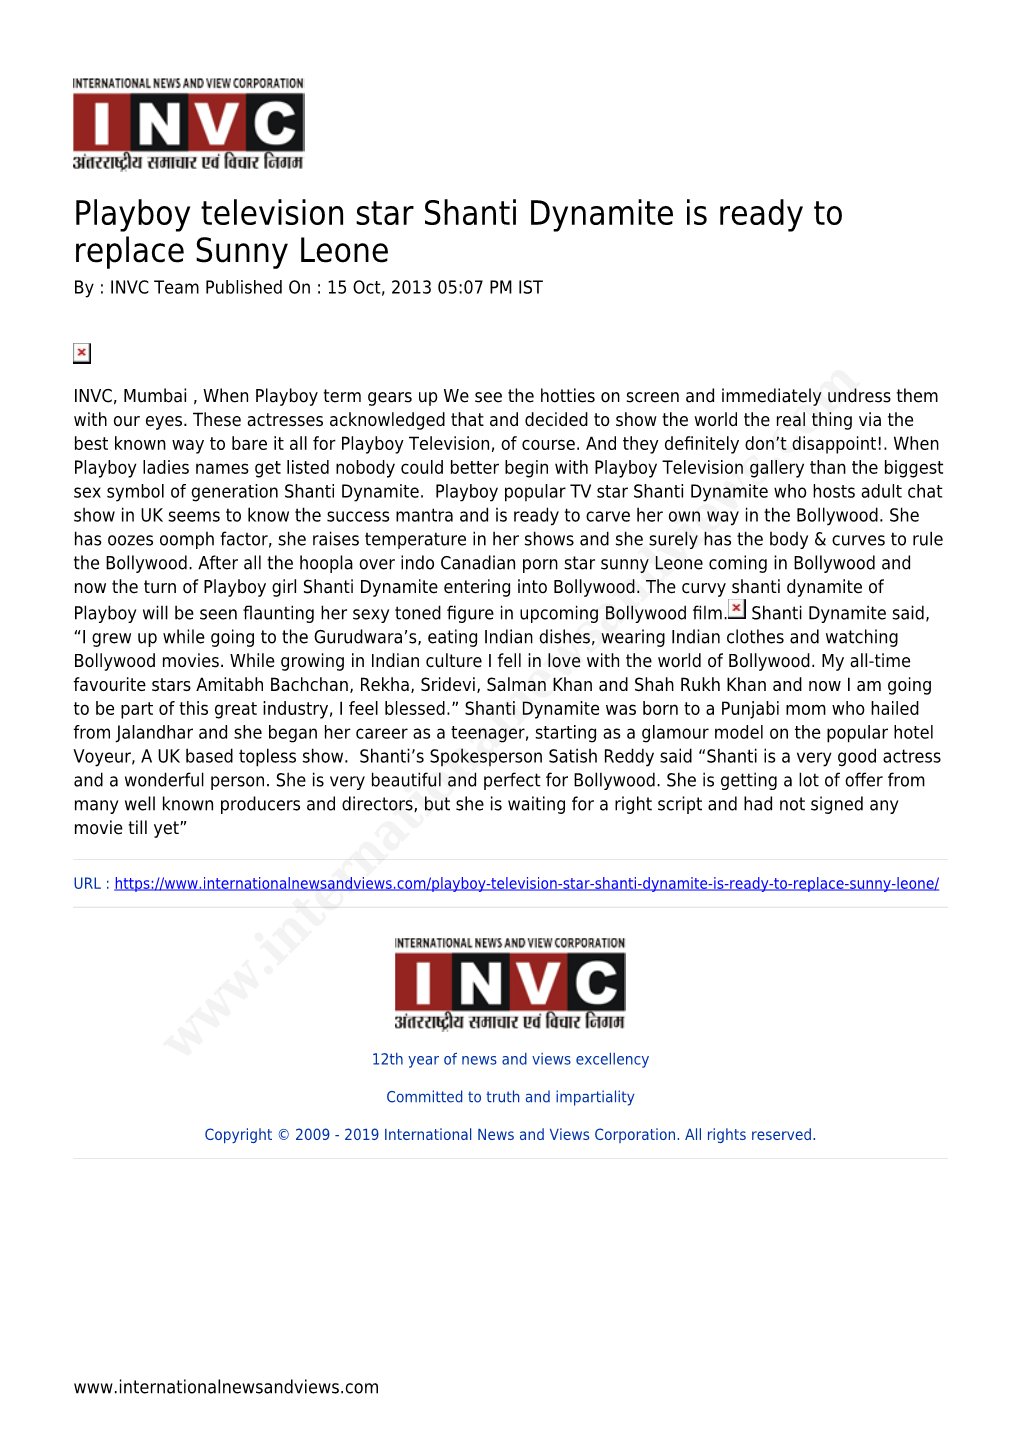 Playboy Television Star Shanti Dynamite Is Ready to Replace Sunny Leone by : INVC Team Published on : 15 Oct, 2013 05:07 PM IST